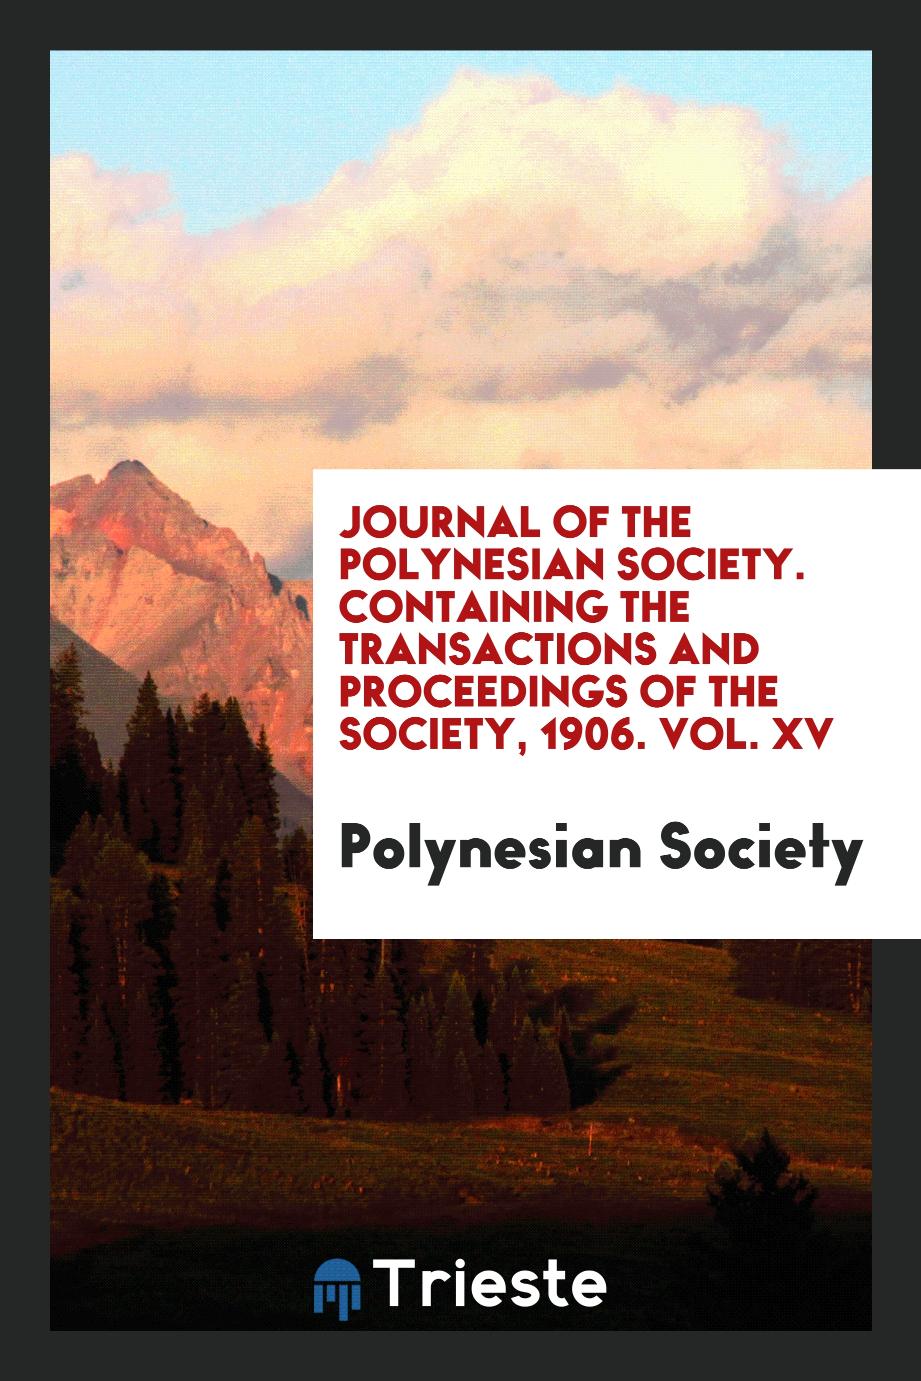 Journal of the Polynesian Society. Containing the Transactions and Proceedings of the Society, 1906. Vol. XV